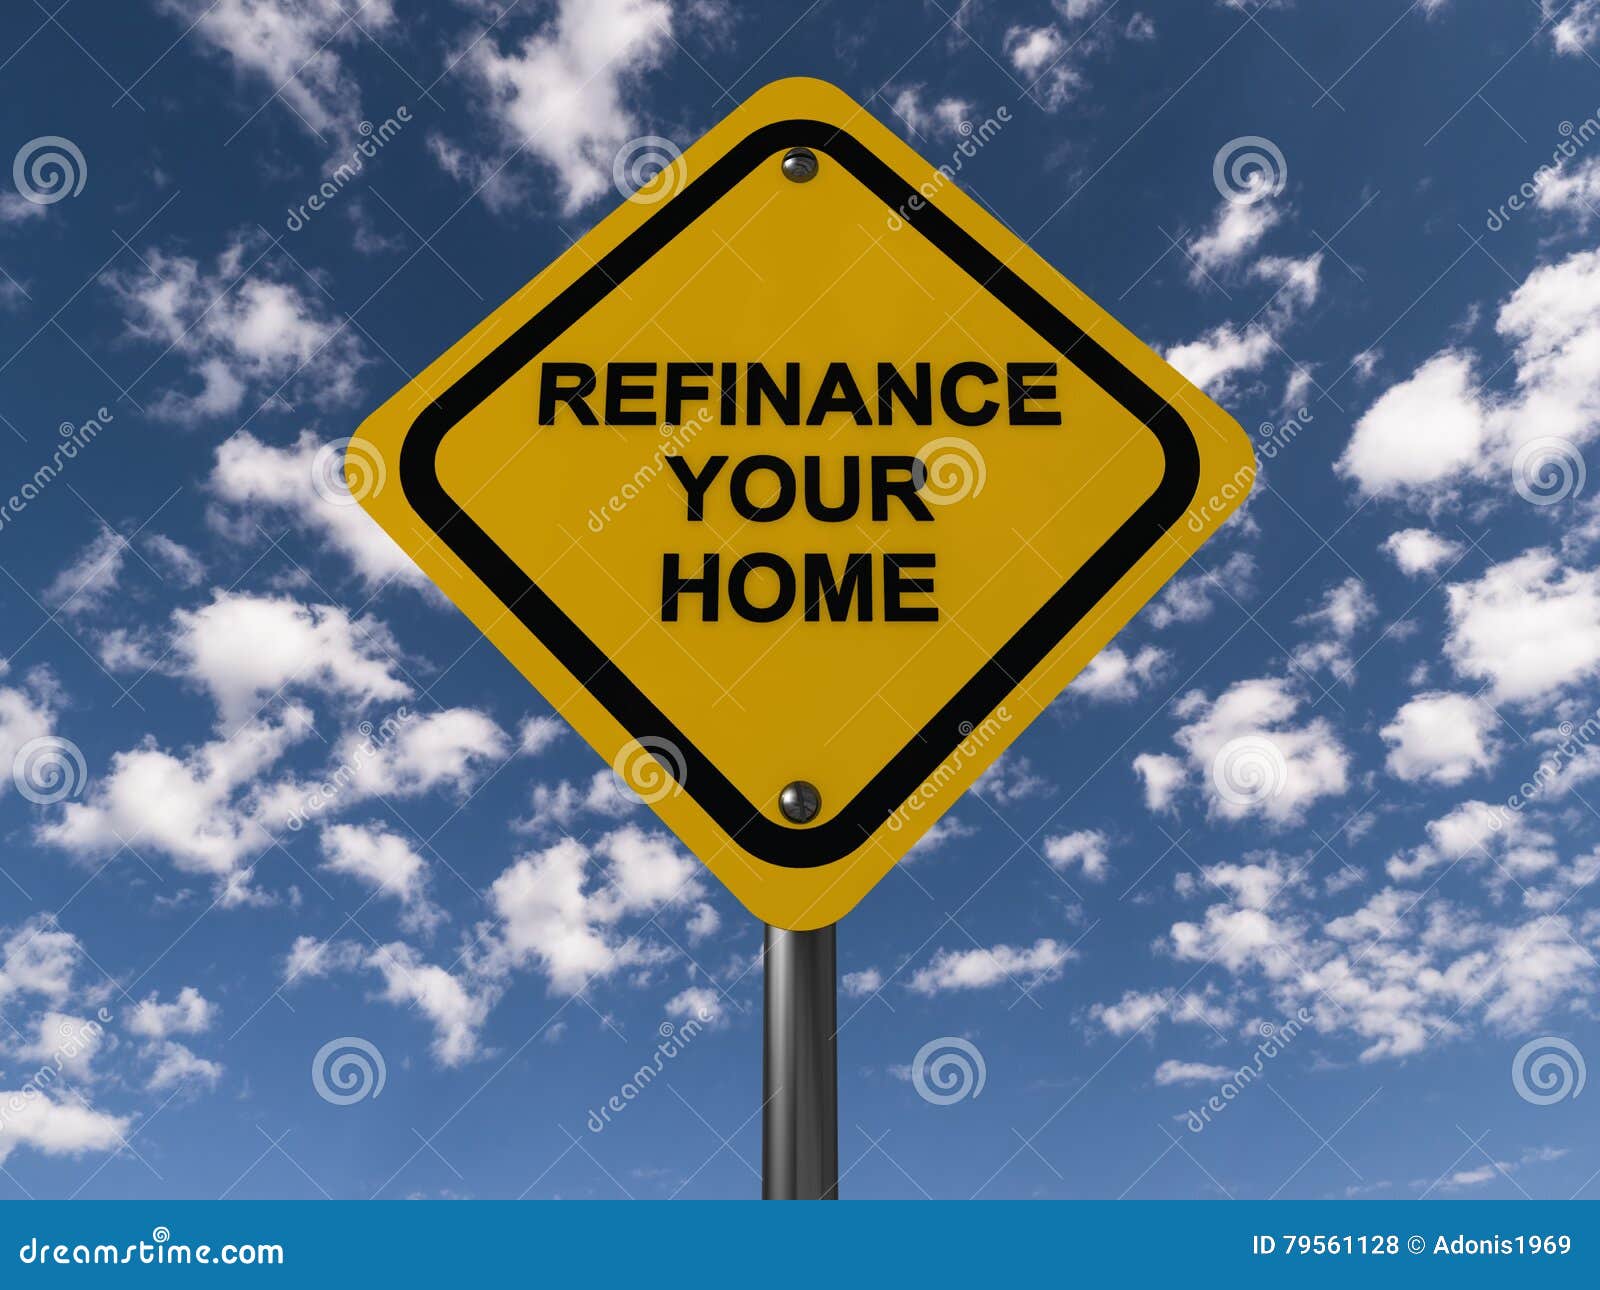 refinance your home